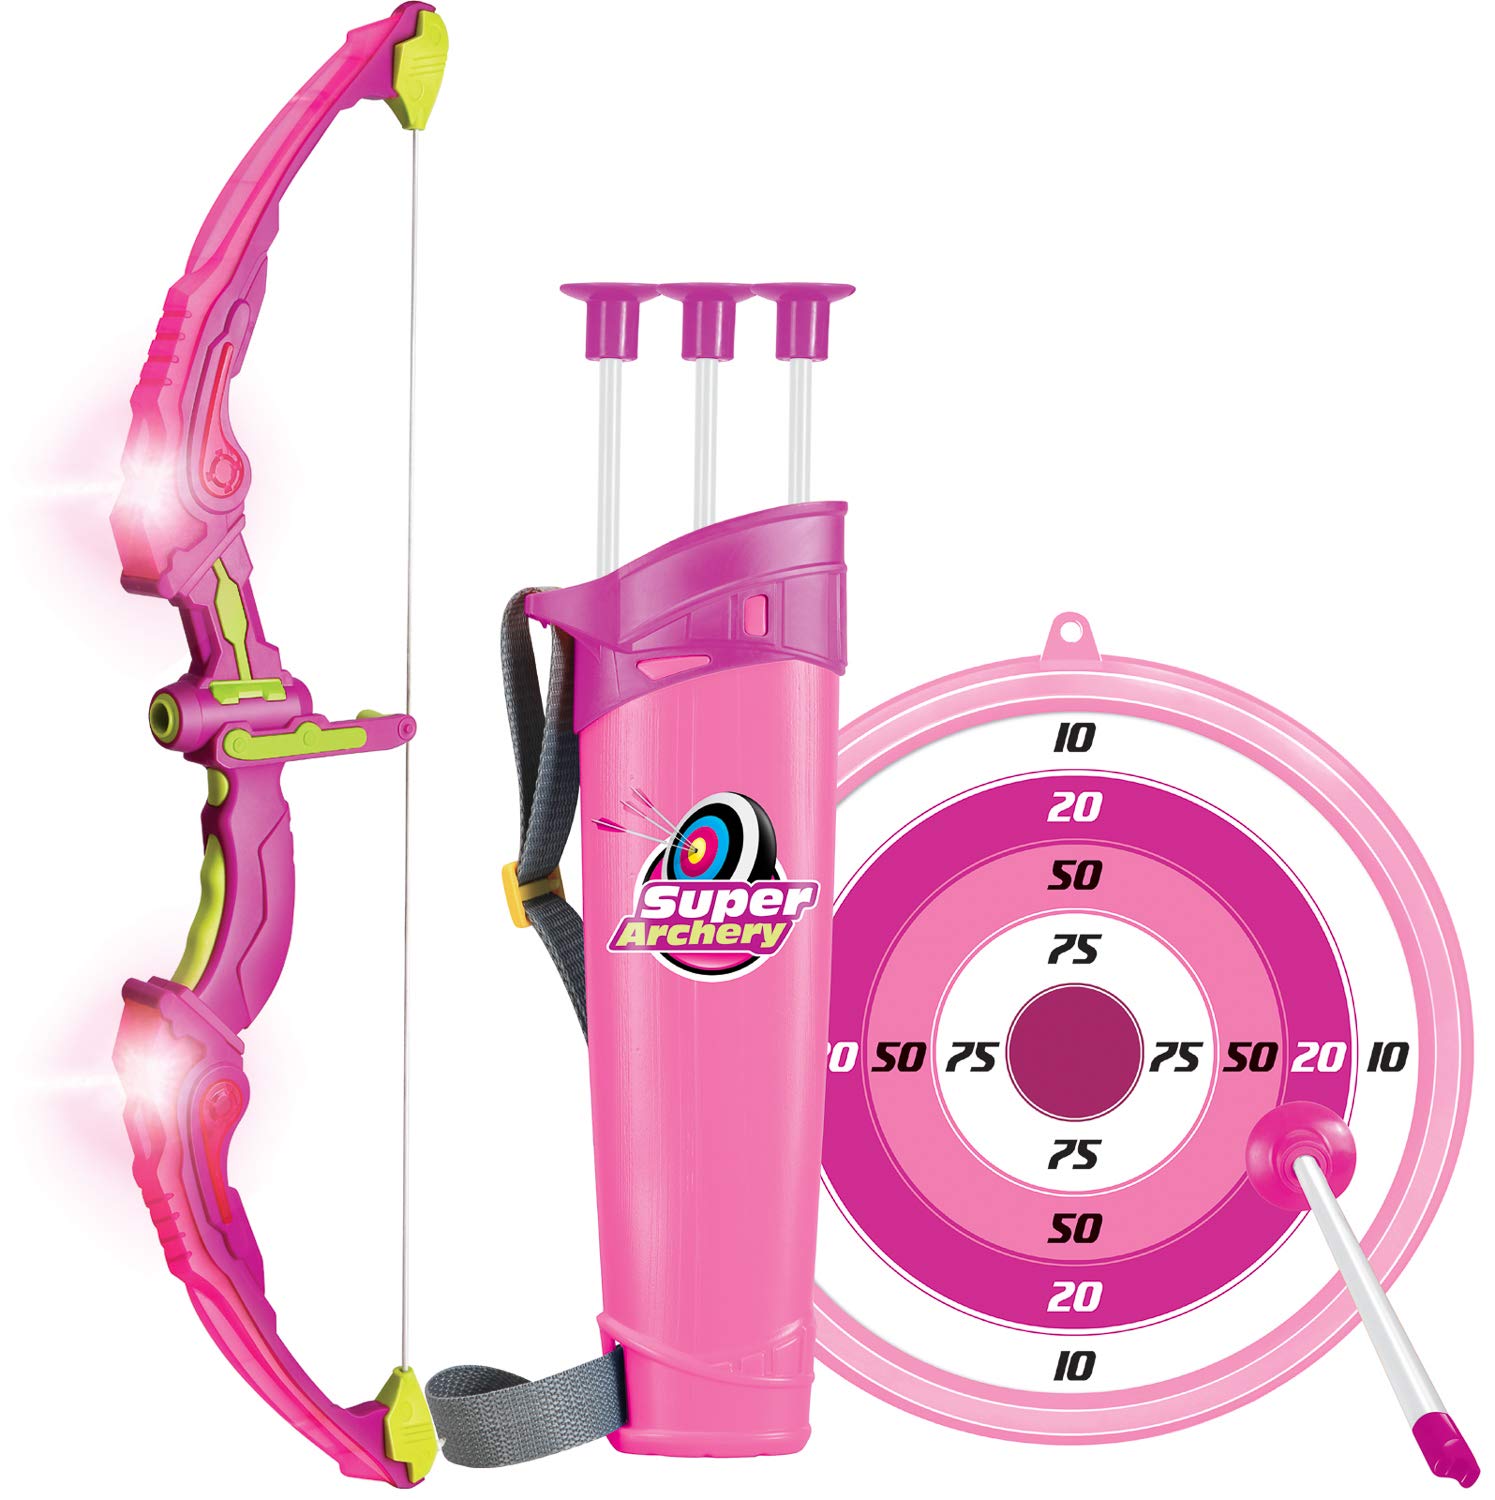 Click N' Play Pink Bow and Arrow Light Up Archery Set | Sport Set for Girls Outdoor Hunting Play | Pink Bow, 3 Suction Cup Arrows, Target, and Quiver - image 1 of 5